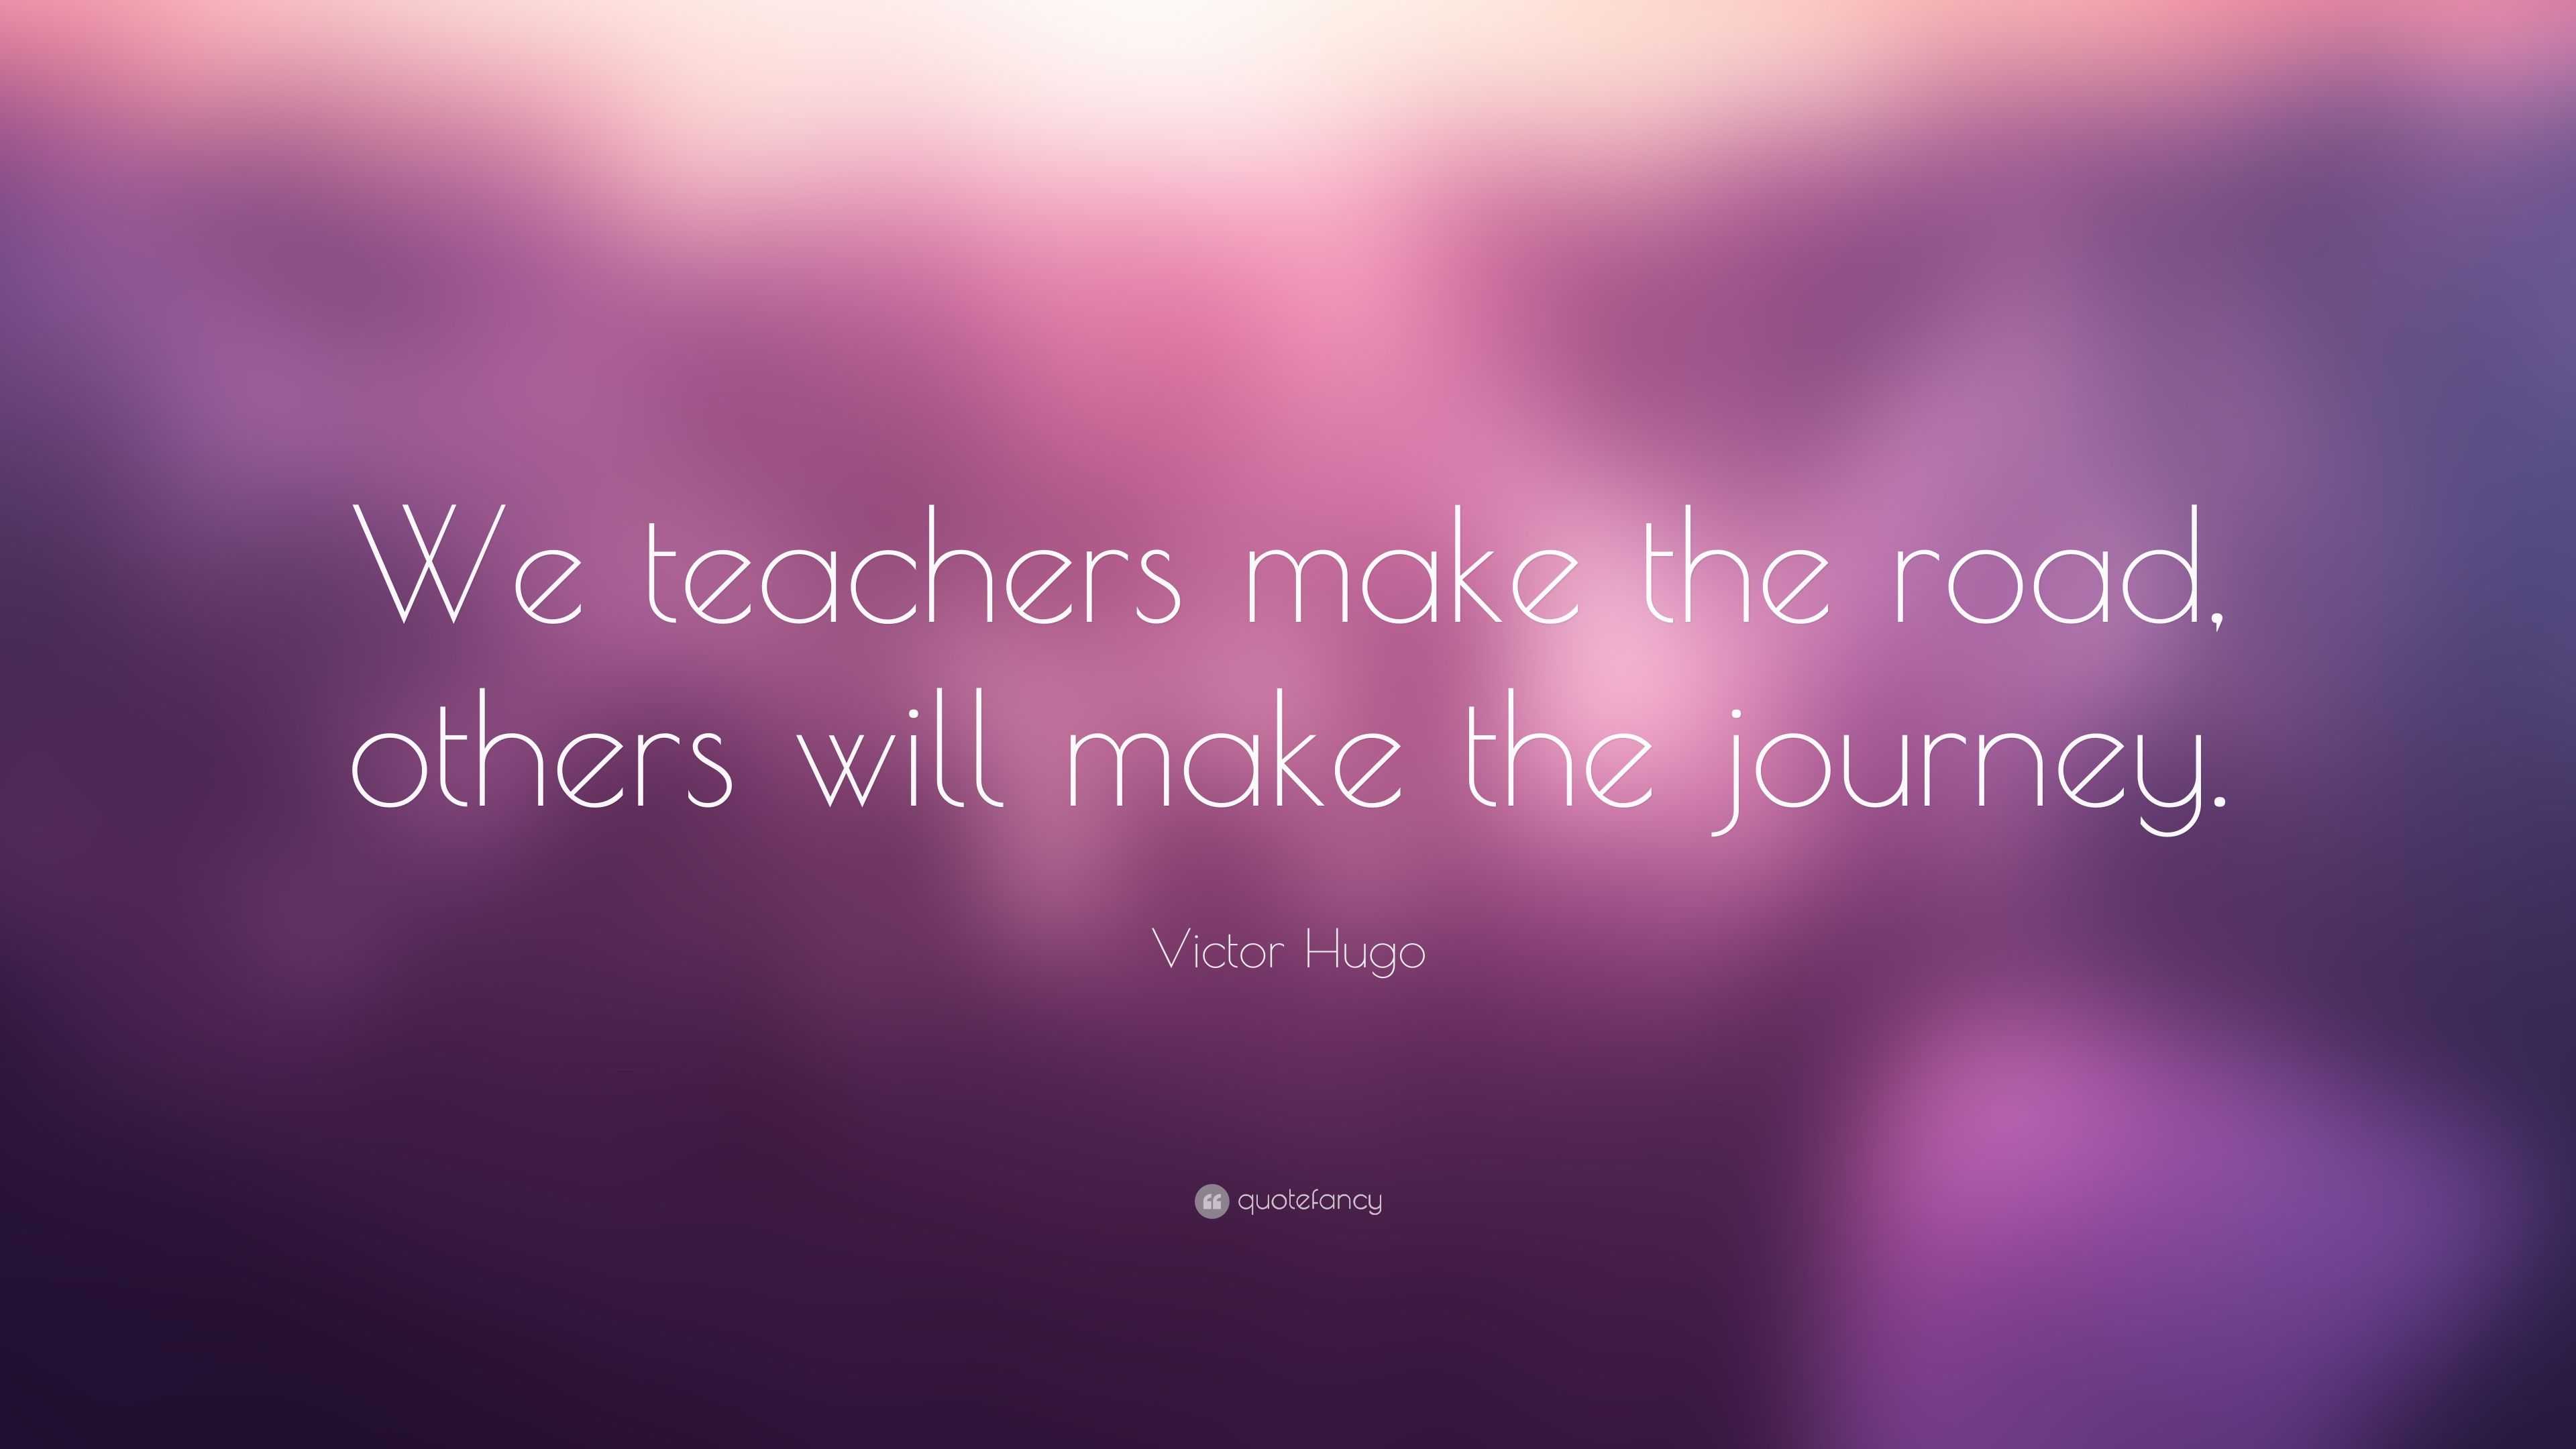 Victor Hugo Quote: “We teachers make the road, others will make the